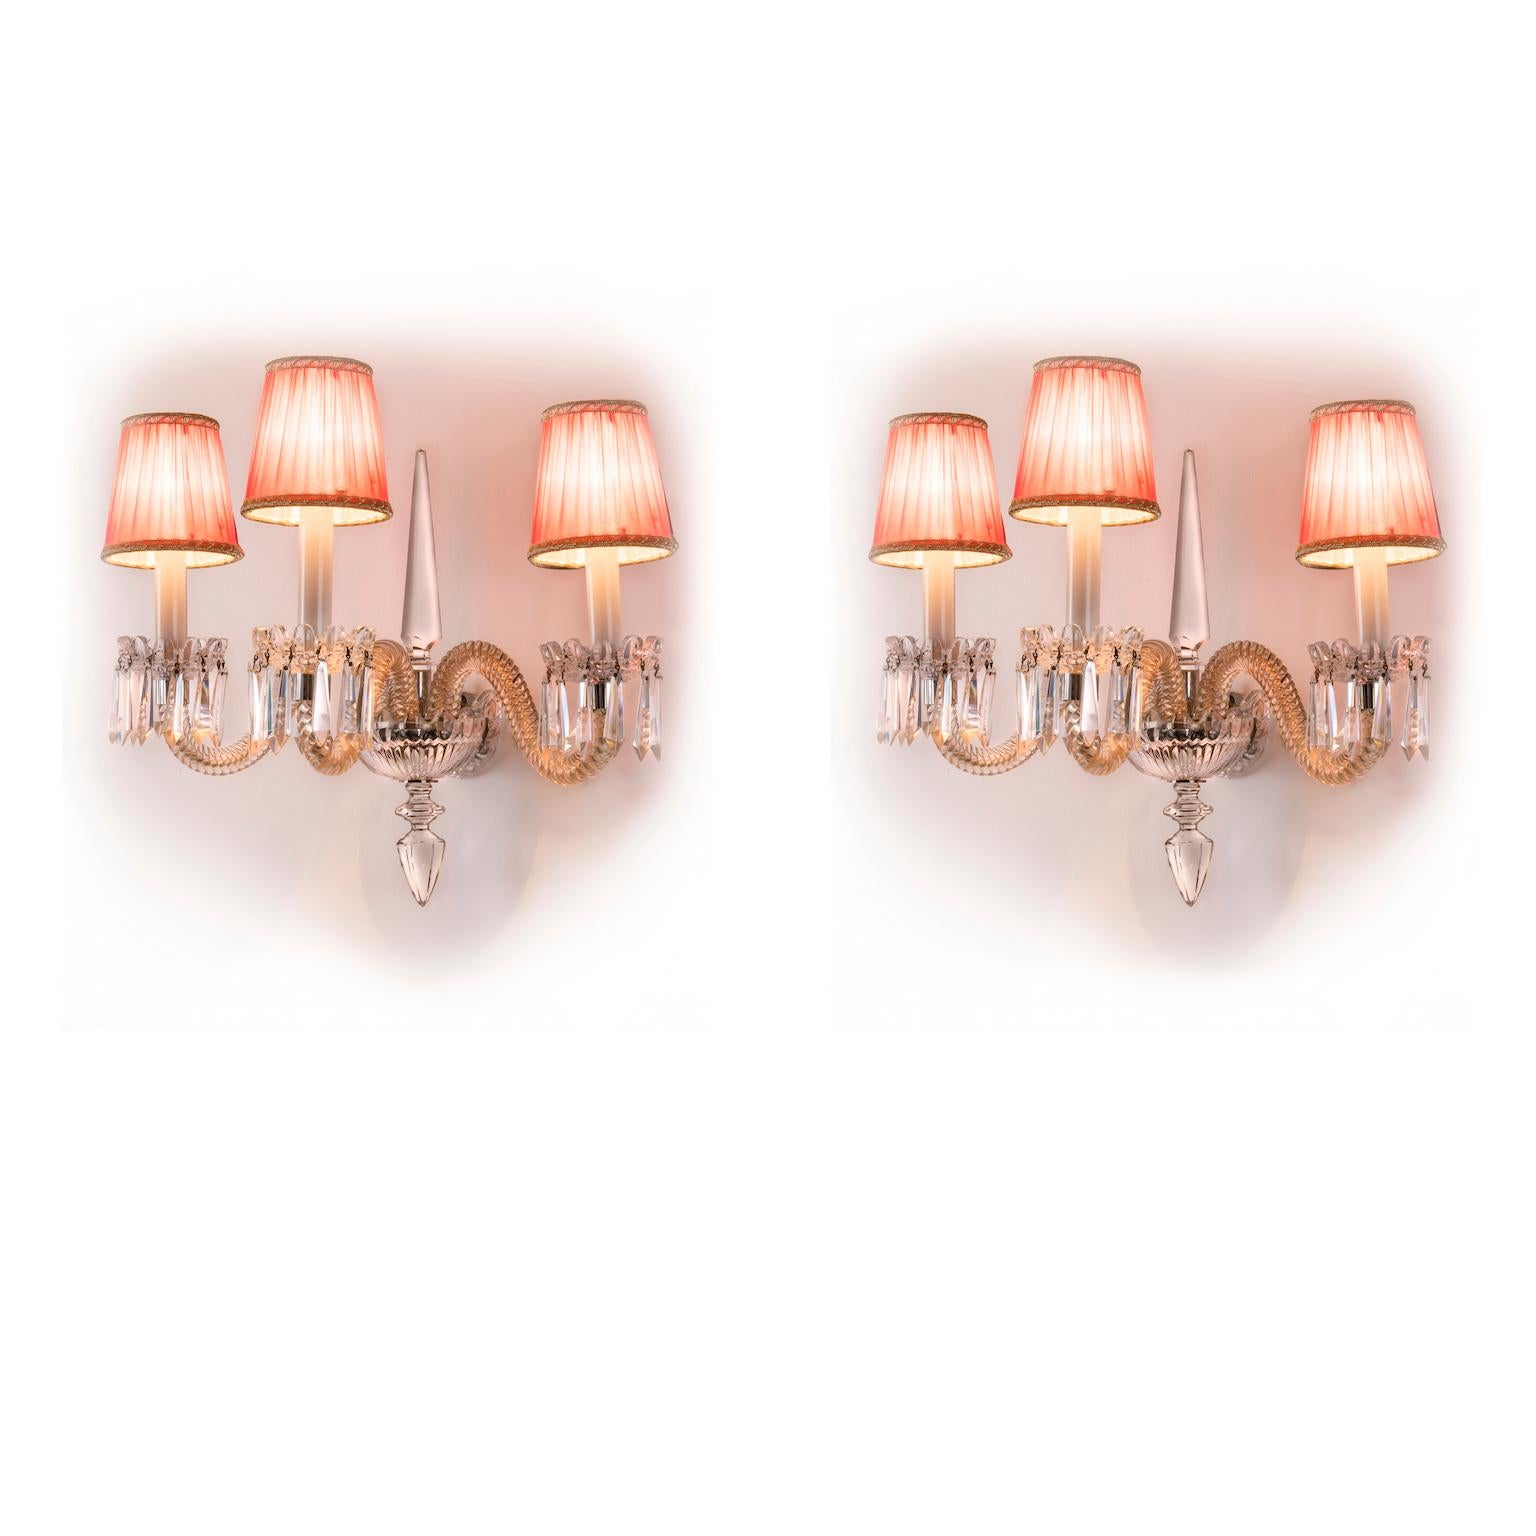 Pair of Italian crystal sconces, with three clear Murano glass scrolling arms realized in twisted rigadin placed in a chromed metal frame covered with a font shaped crystal cover. This charming sconces comes from a private residence in Genoa and